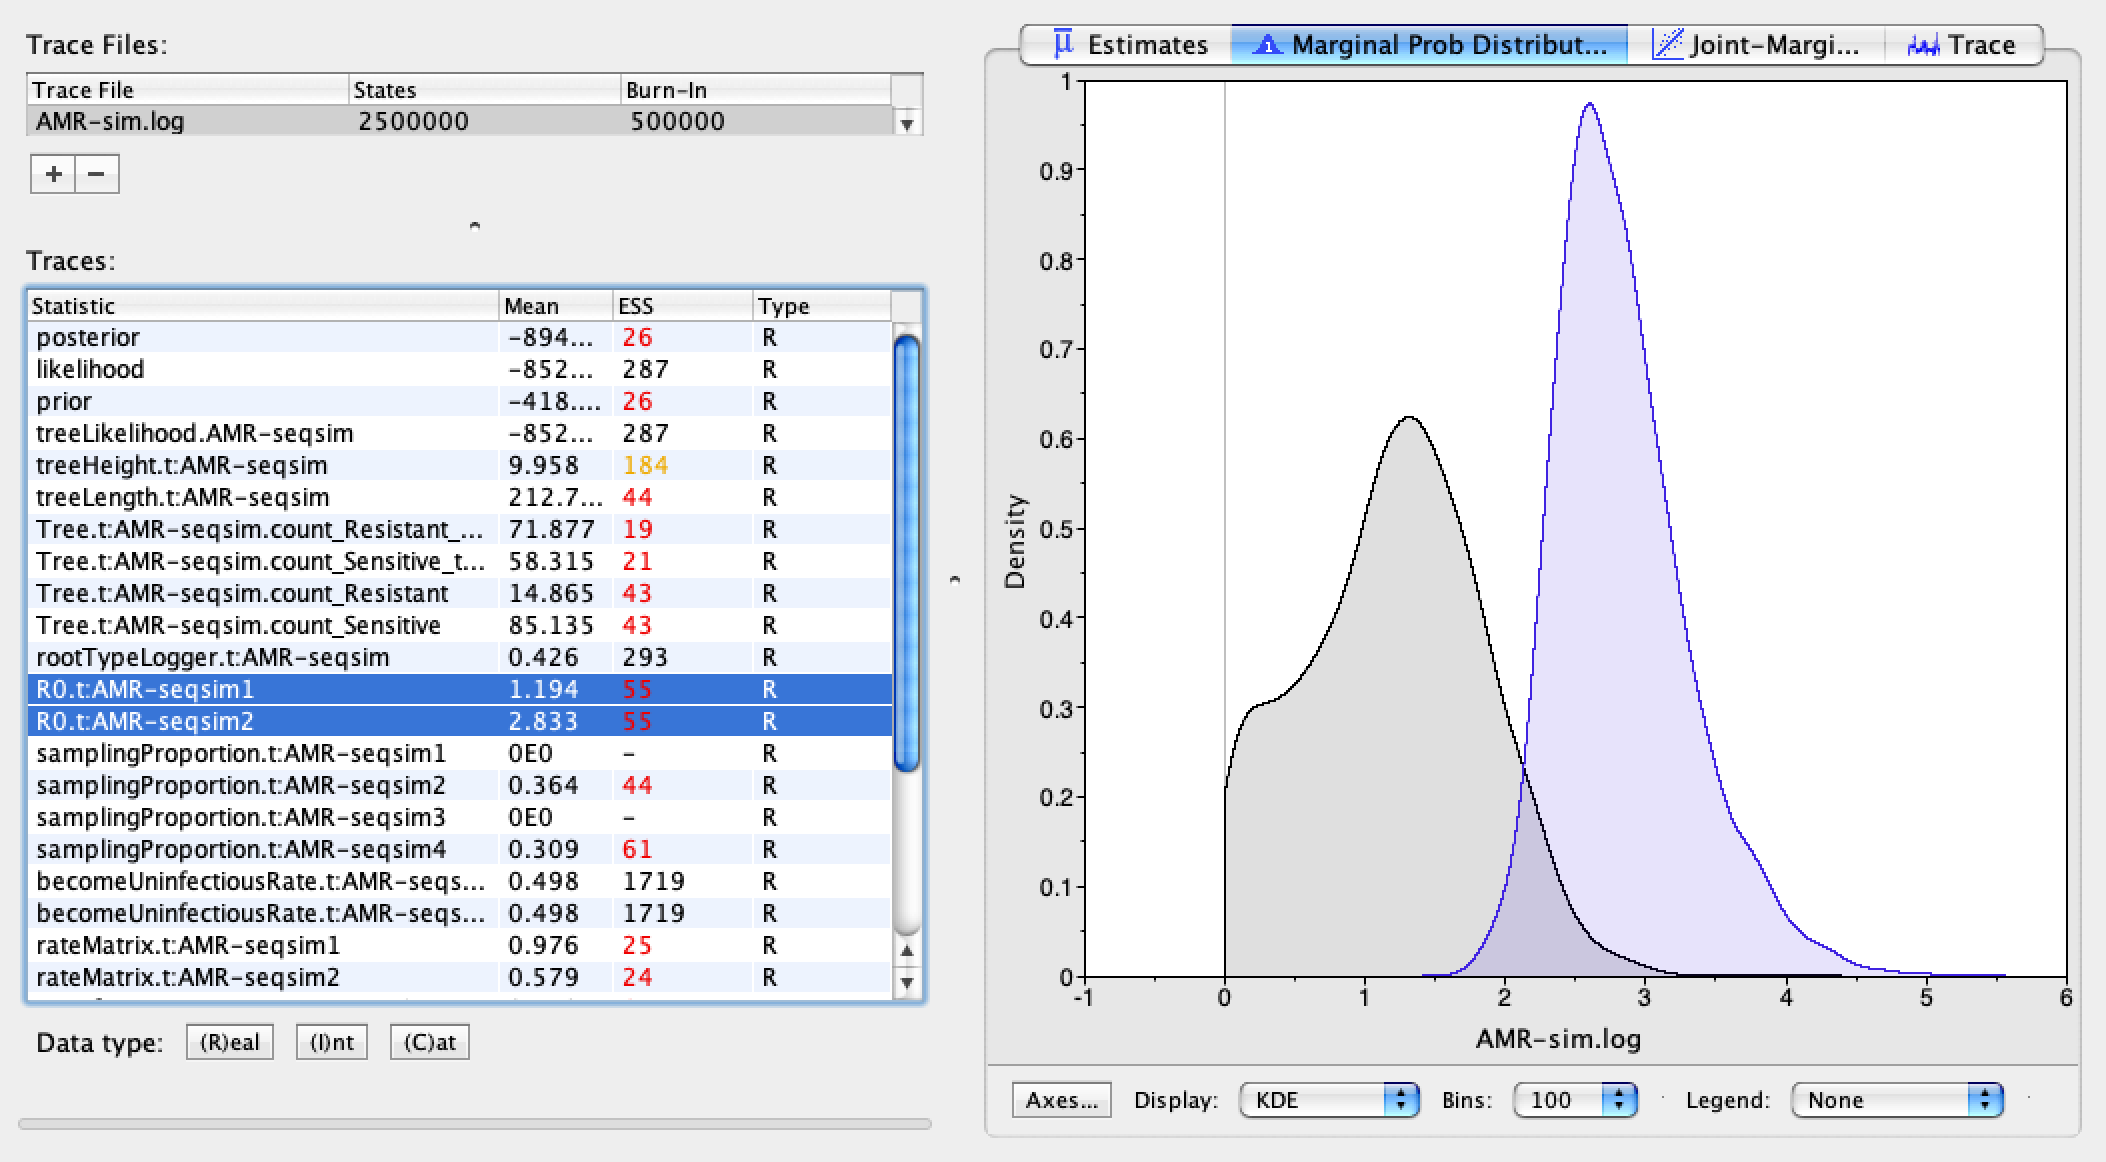 Estimated posterior distributions for the R0 of each type